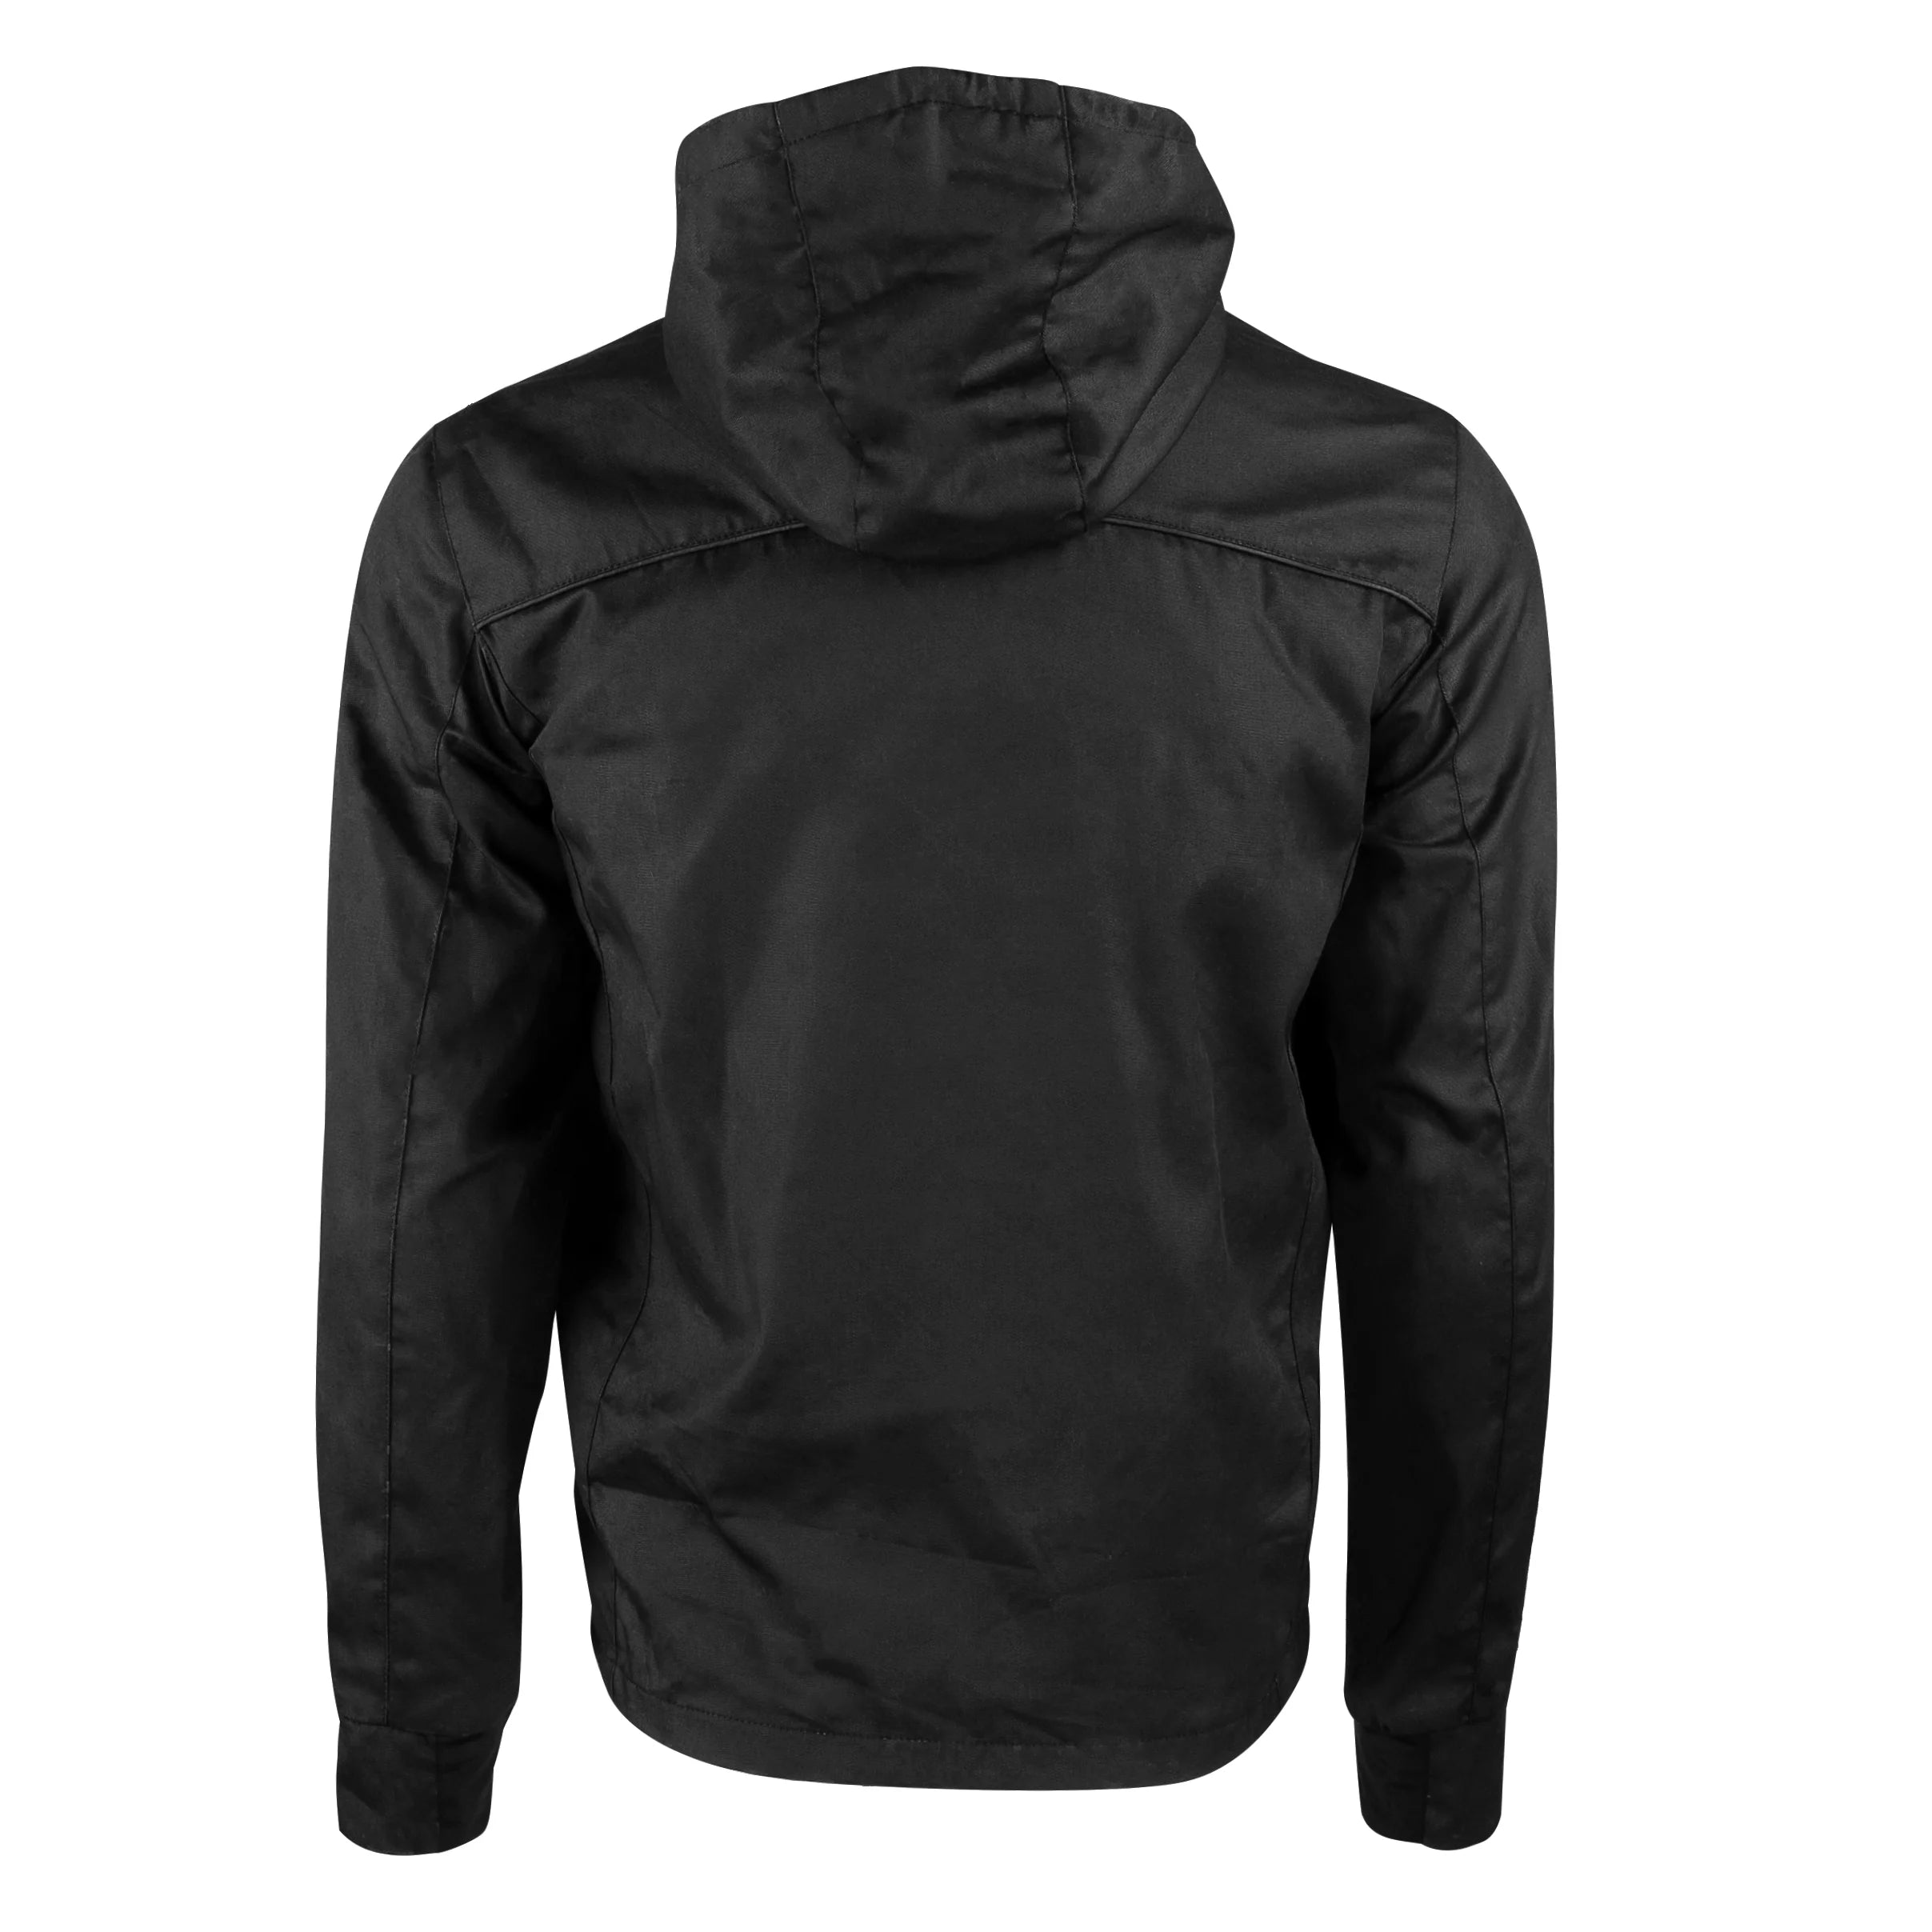 GO FOR BROKE ARMOURED HOODY (Black) | Speed and Strength